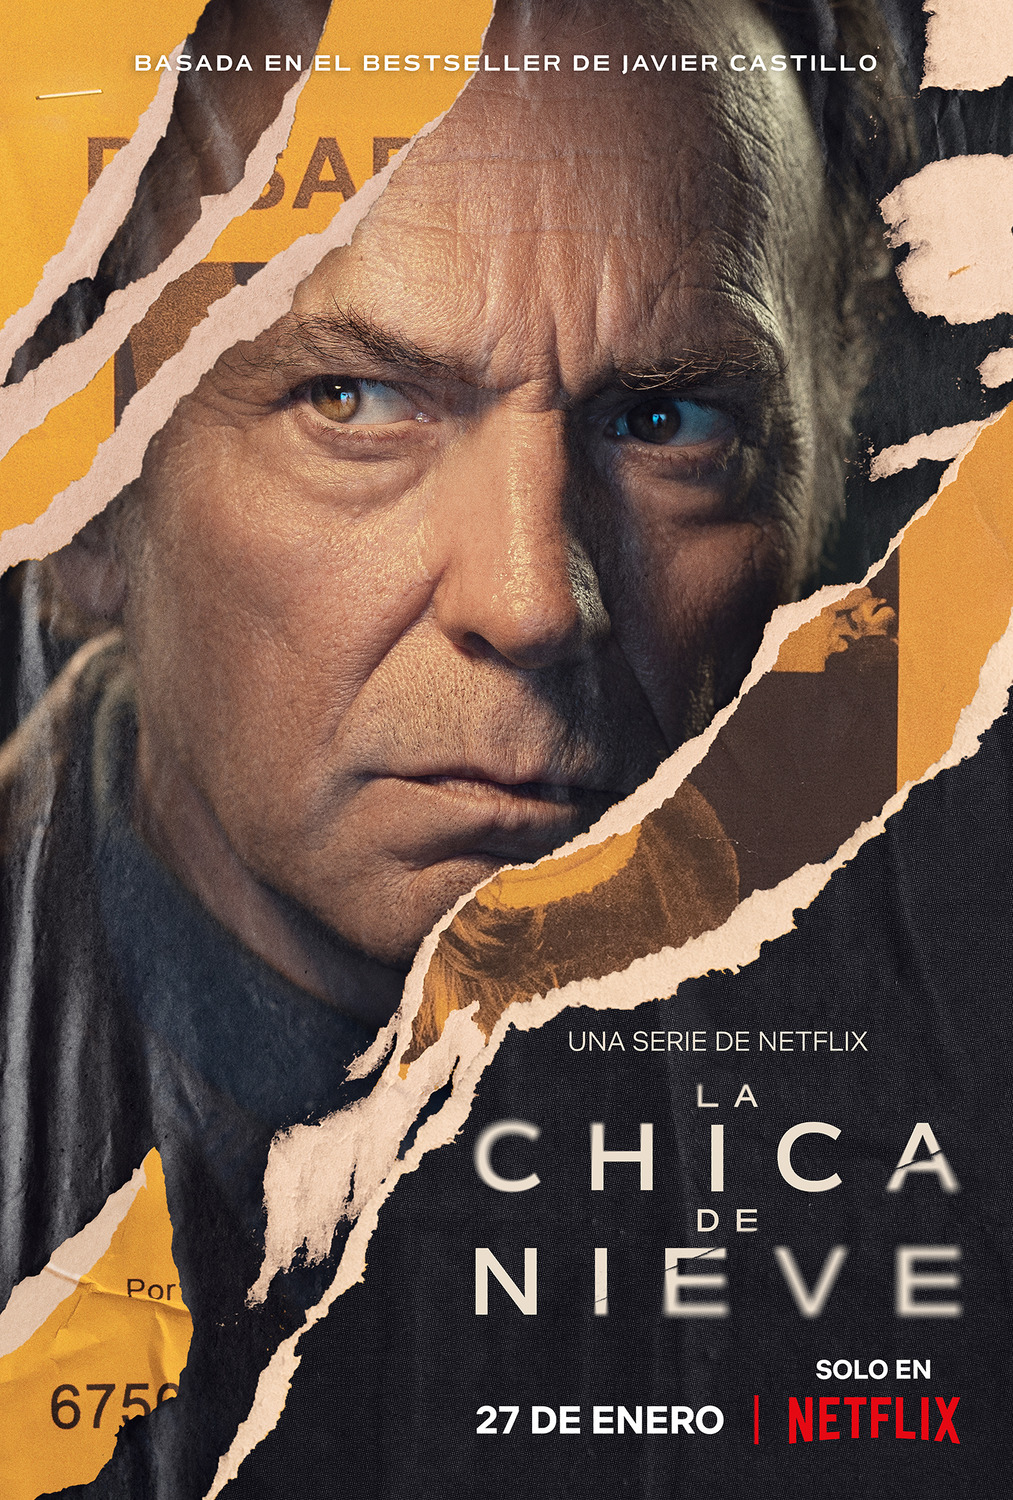 Extra Large TV Poster Image for La chica de nieve (#2 of 6)